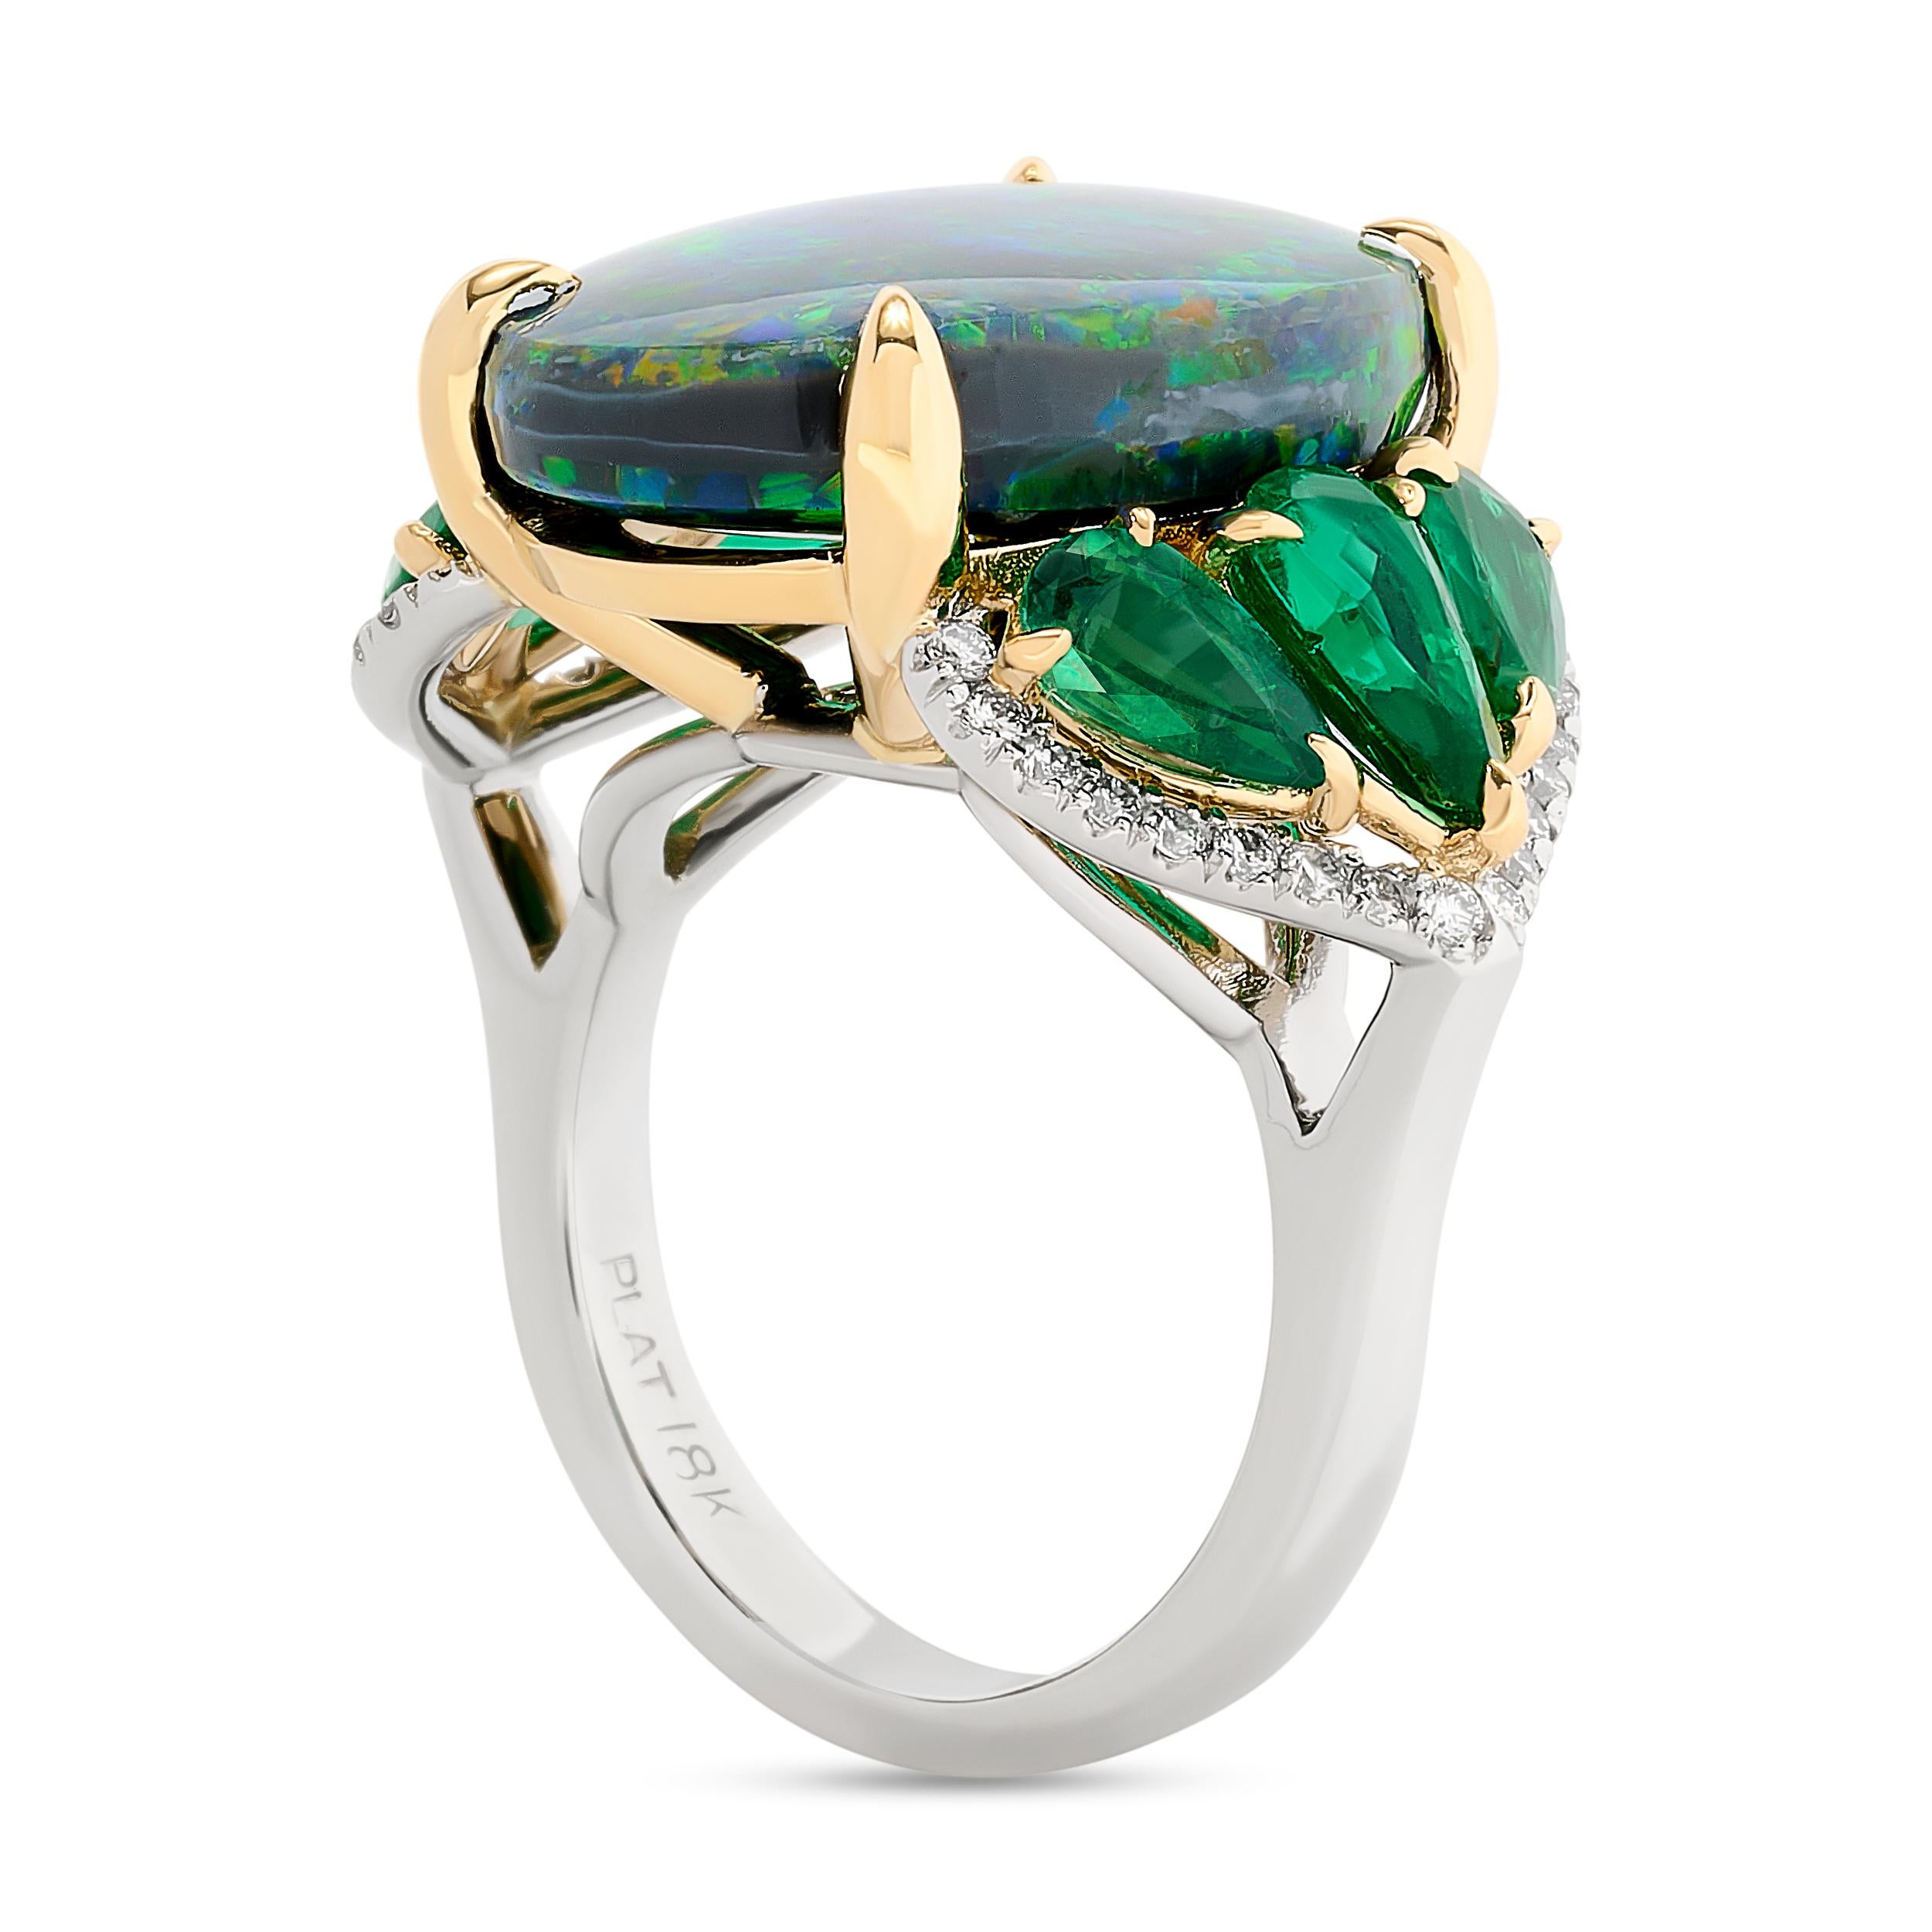 Nestled amidst vibrant green emeralds, the black opal ring exuded an enchanting allure.

The center black opal weighs approximately 9.50 carats and is accompanied with a GIA Black, No Treatment certificate. There are 6 pear shaped emeralds that